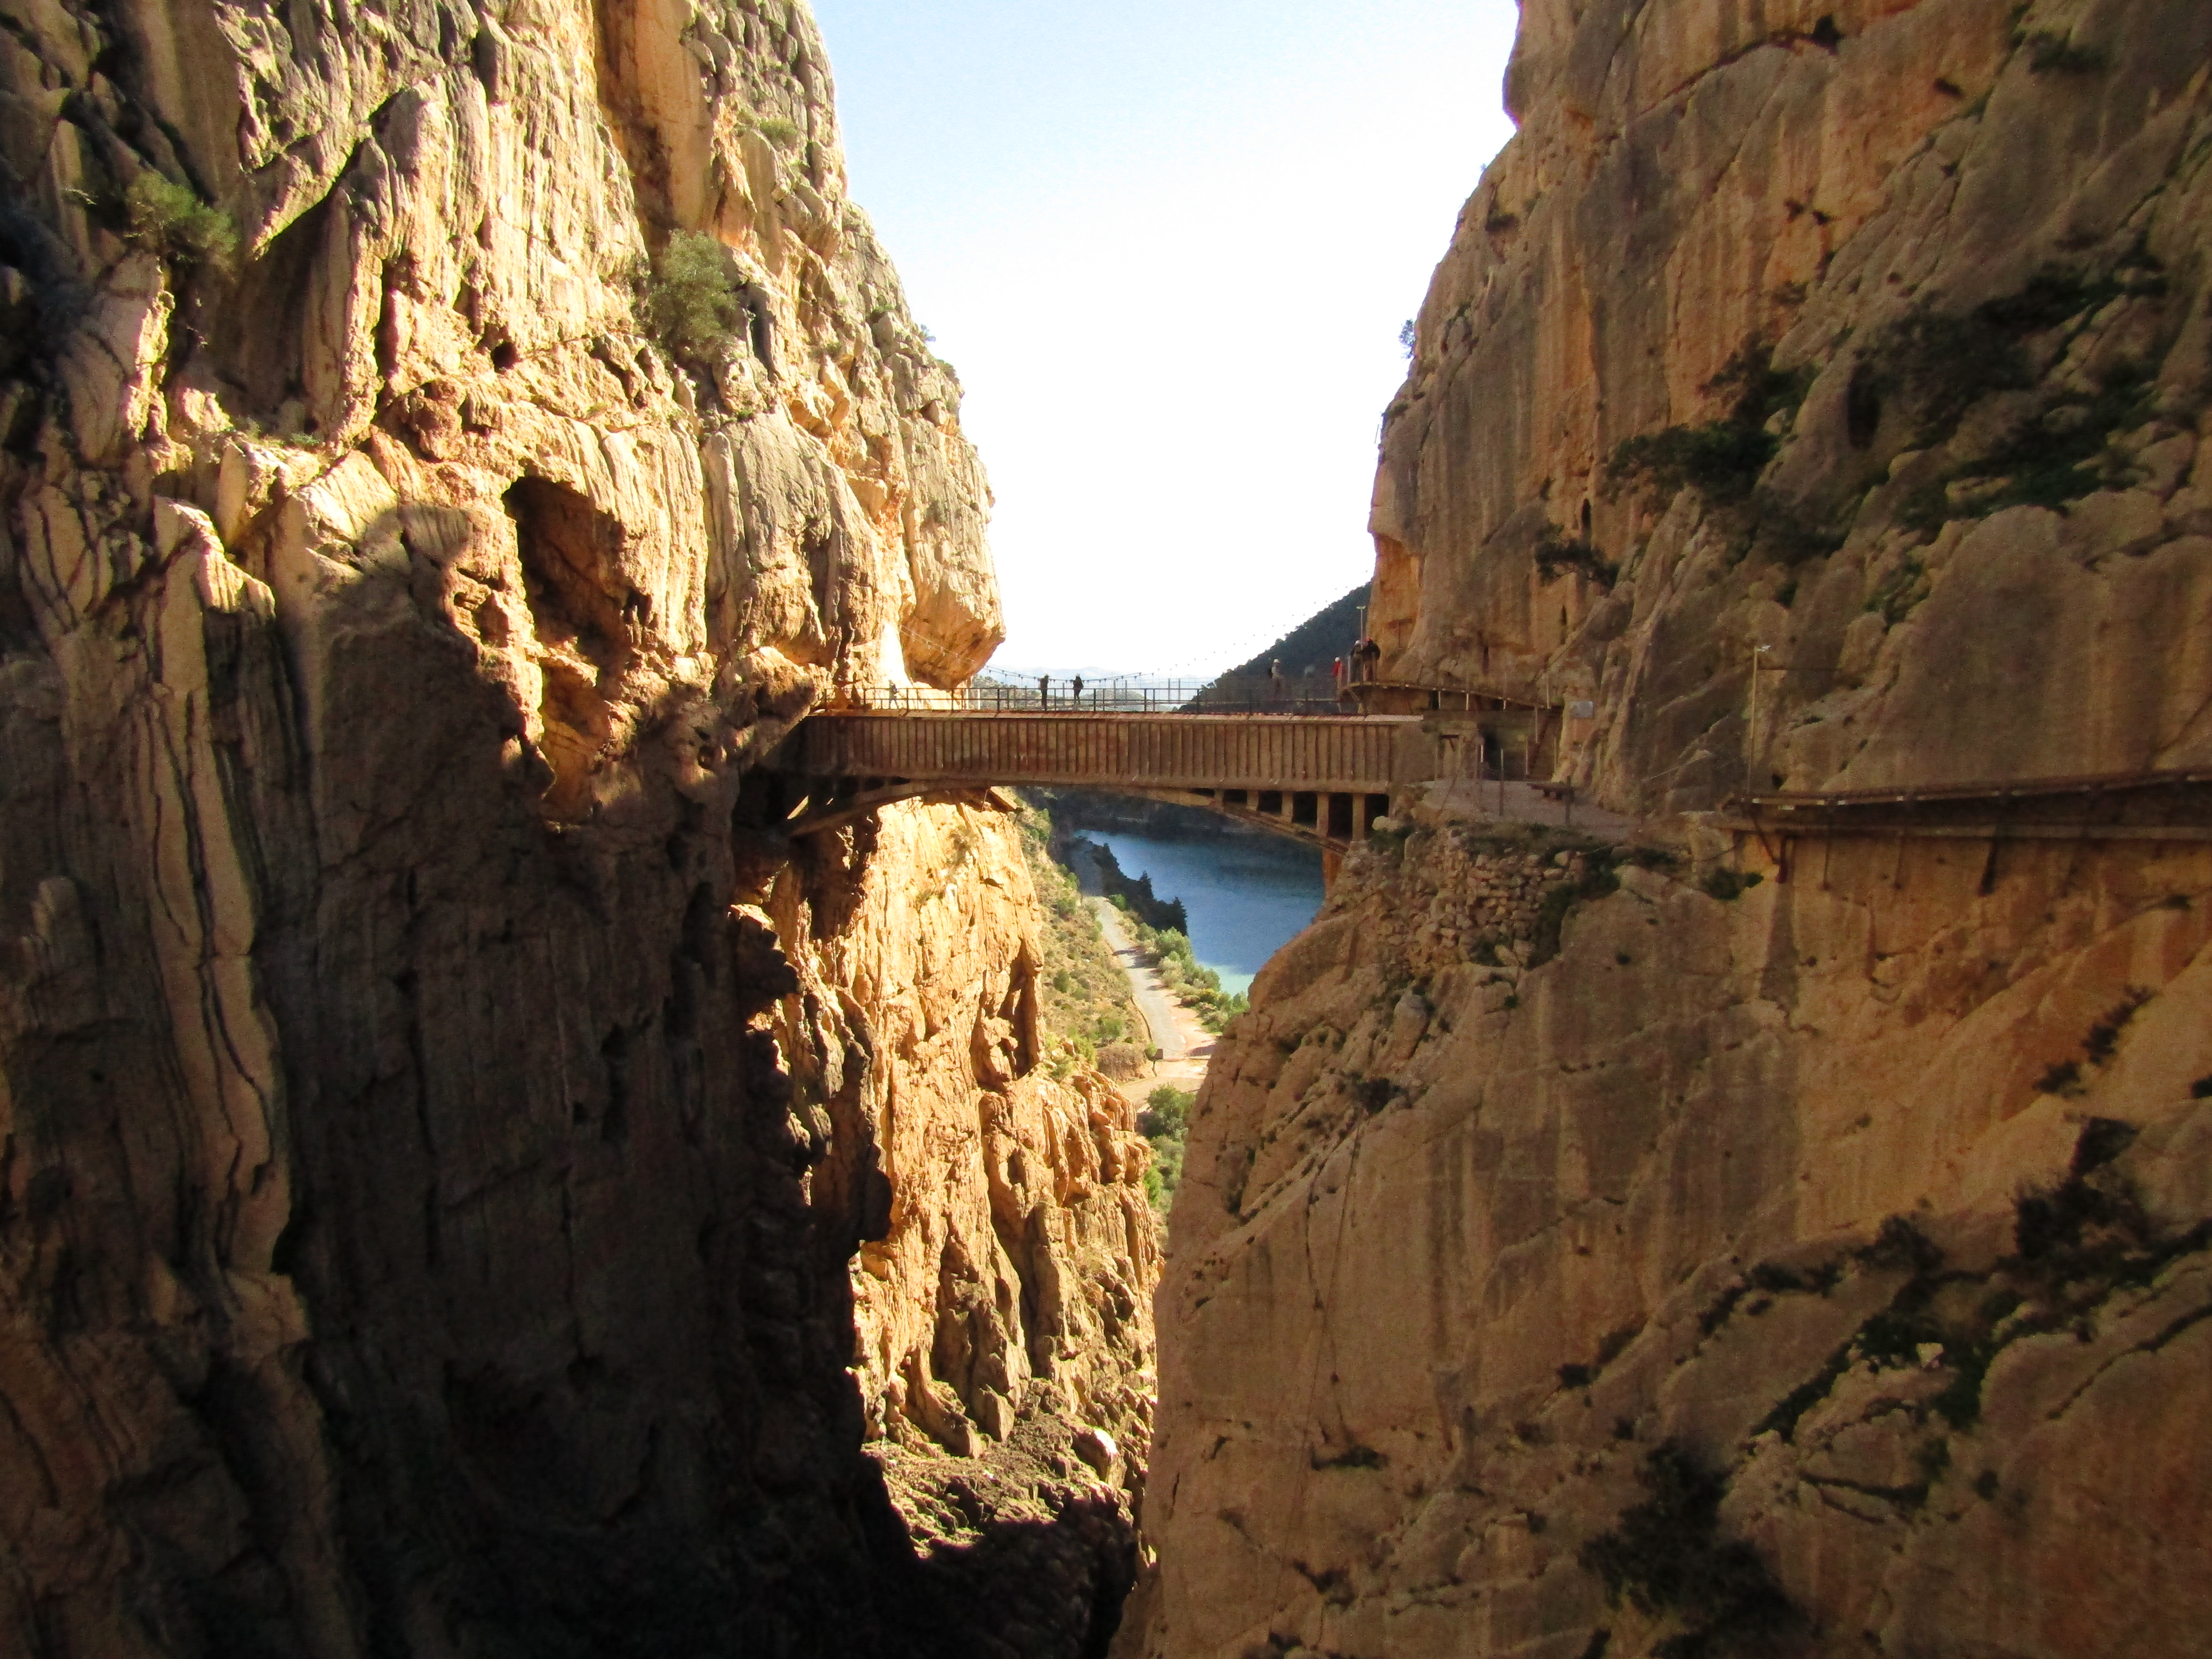 How To Get To El Caminito del Rey And What To Expect